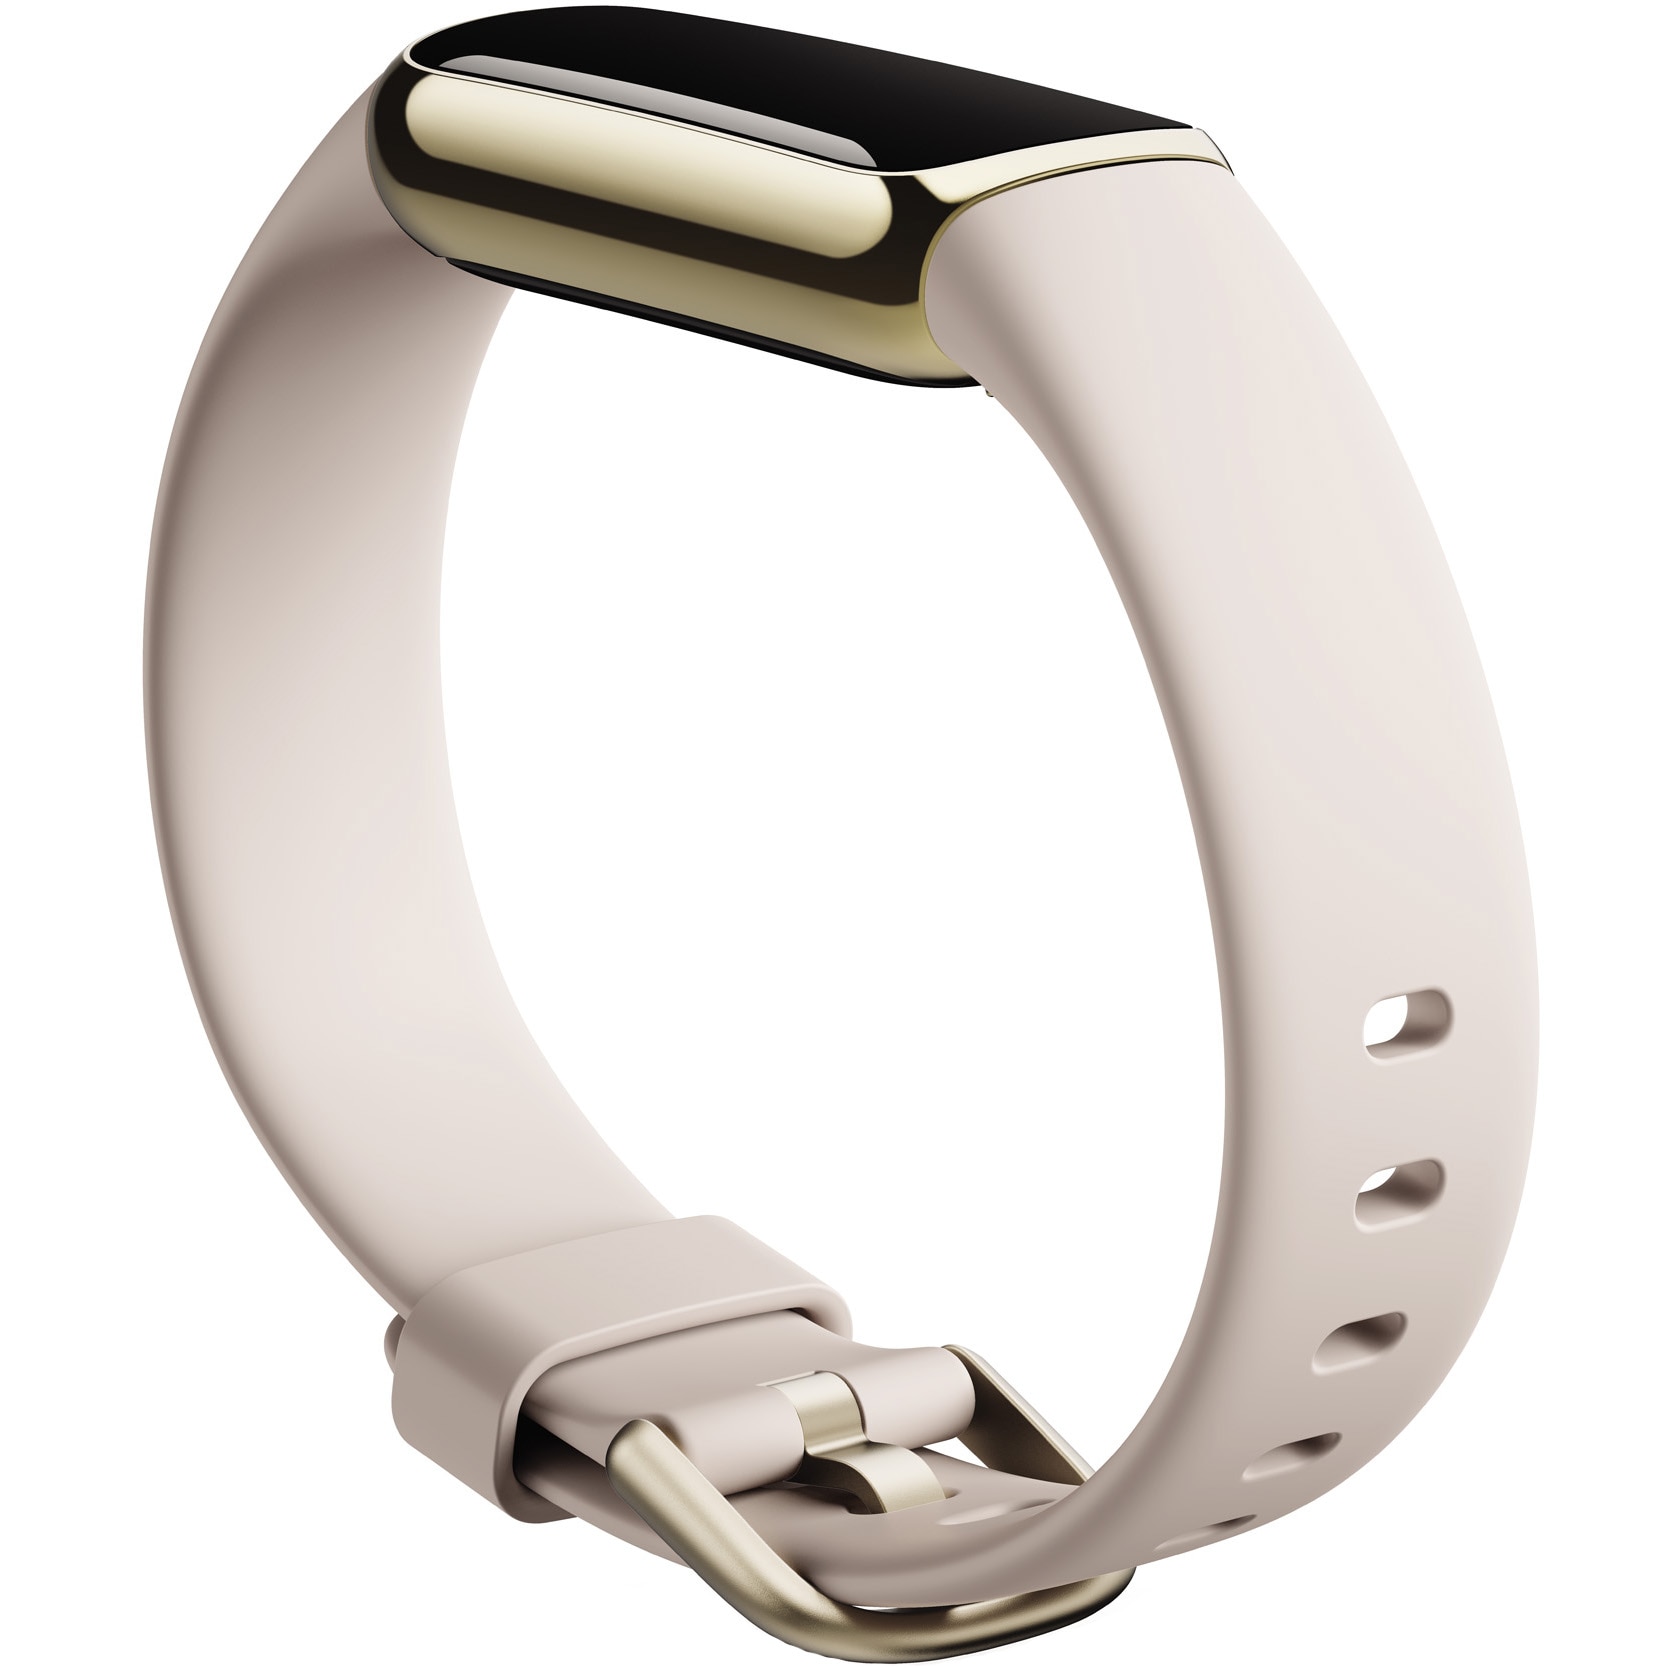 Perch Egoism use Bratara fitness Fitbit Luxe,Gold/White - eMAG.ro